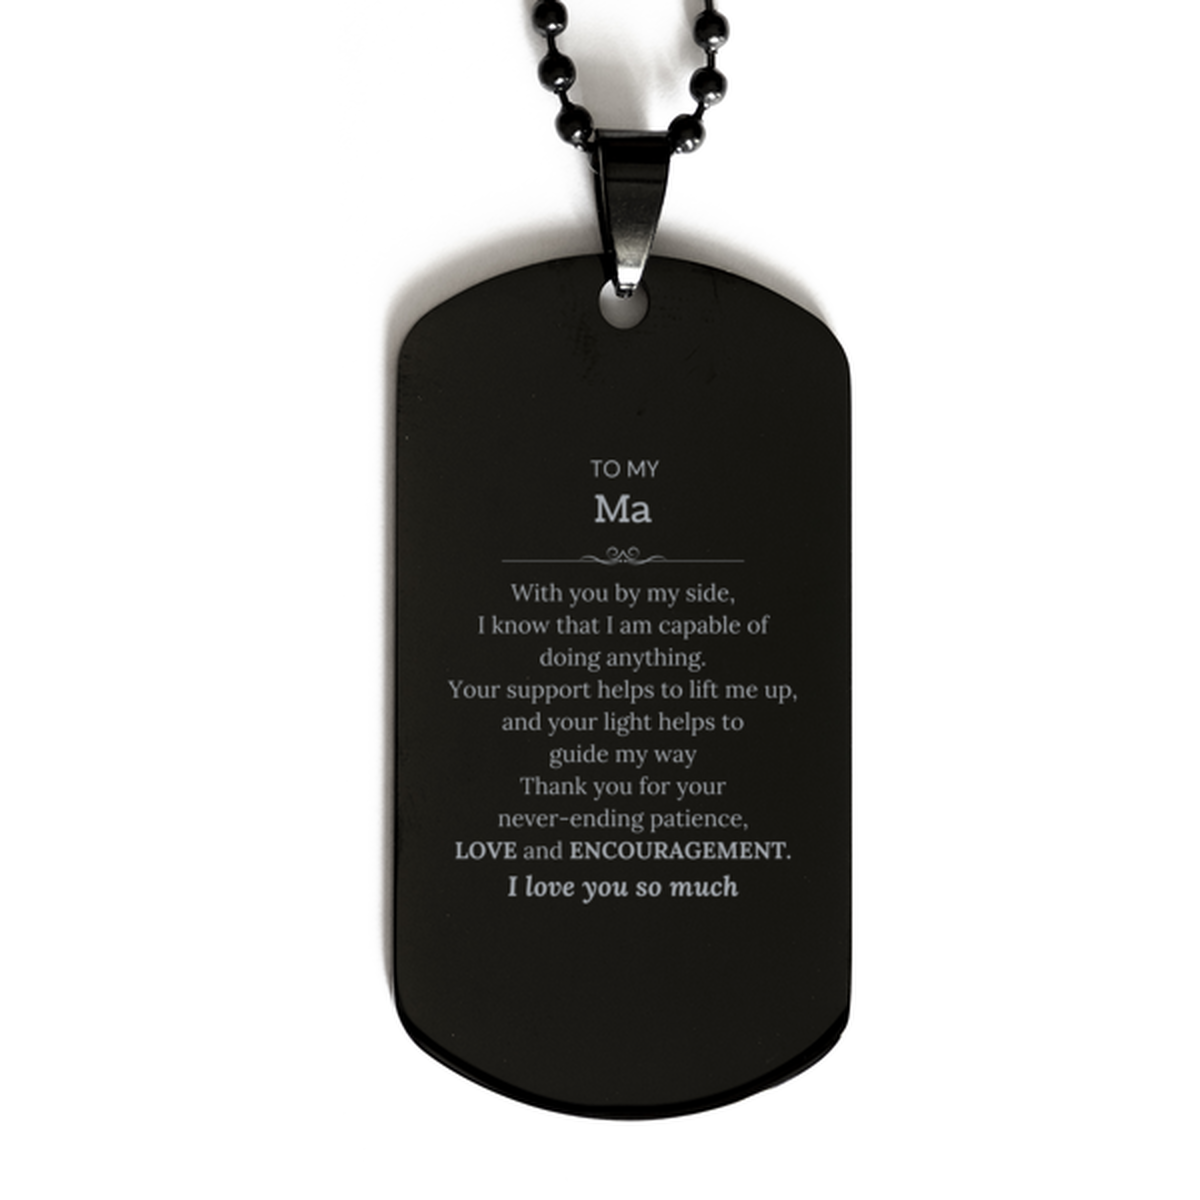 Appreciation Ma Black Dog Tag Gifts, To My Ma Birthday Christmas Wedding Keepsake Gifts for Ma With you by my side, I know that I am capable of doing anything. I love you so much